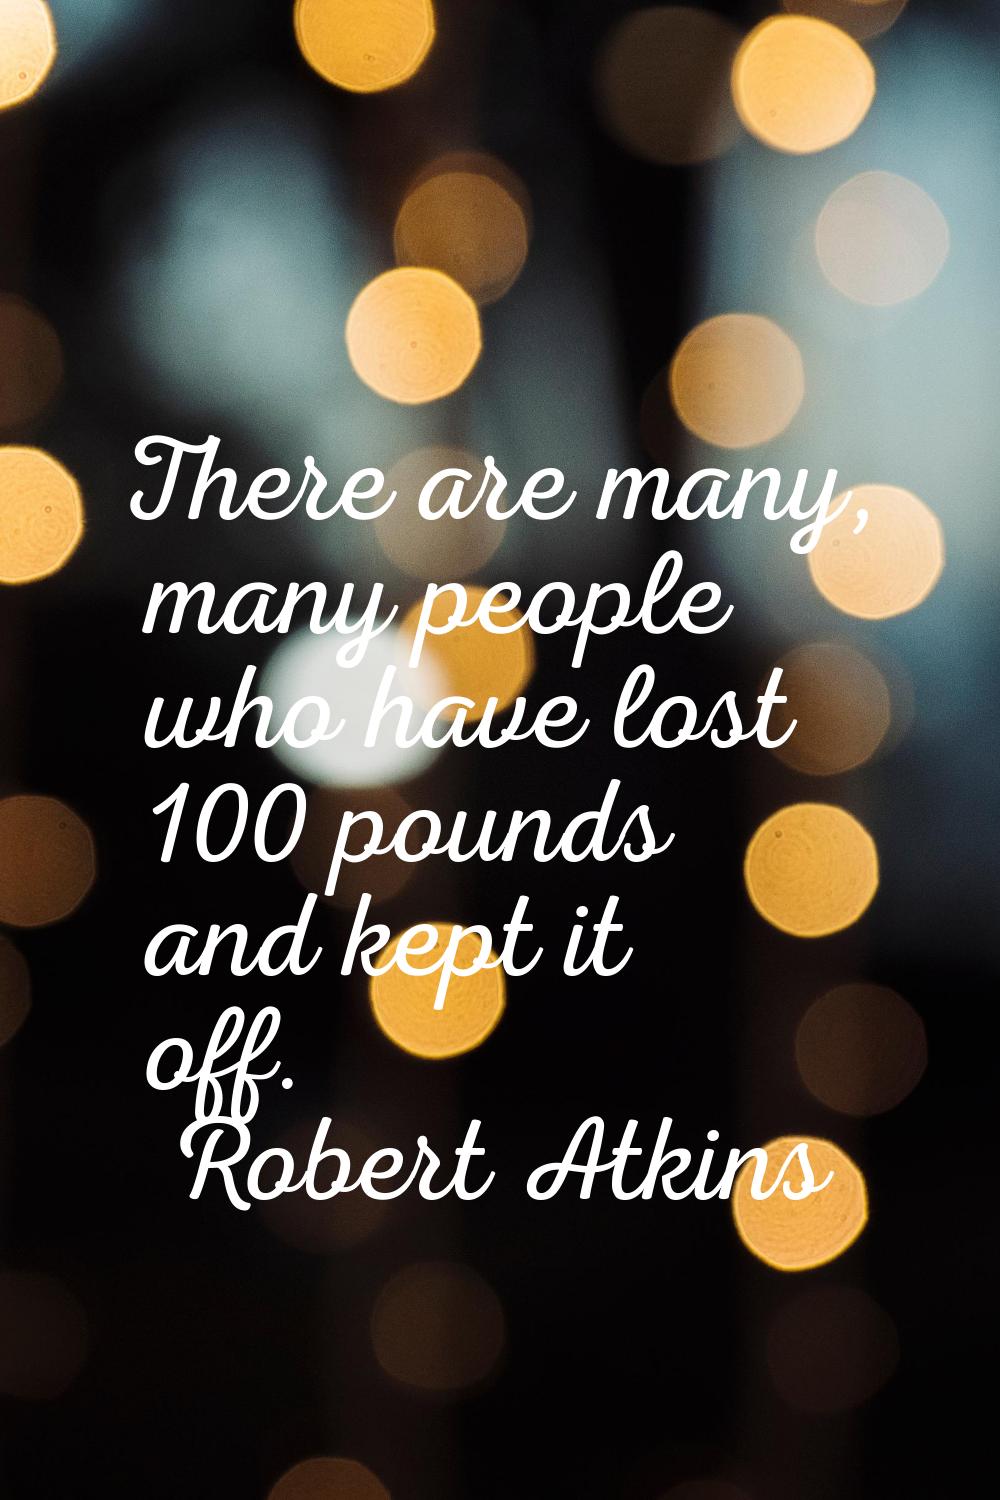 There are many, many people who have lost 100 pounds and kept it off.